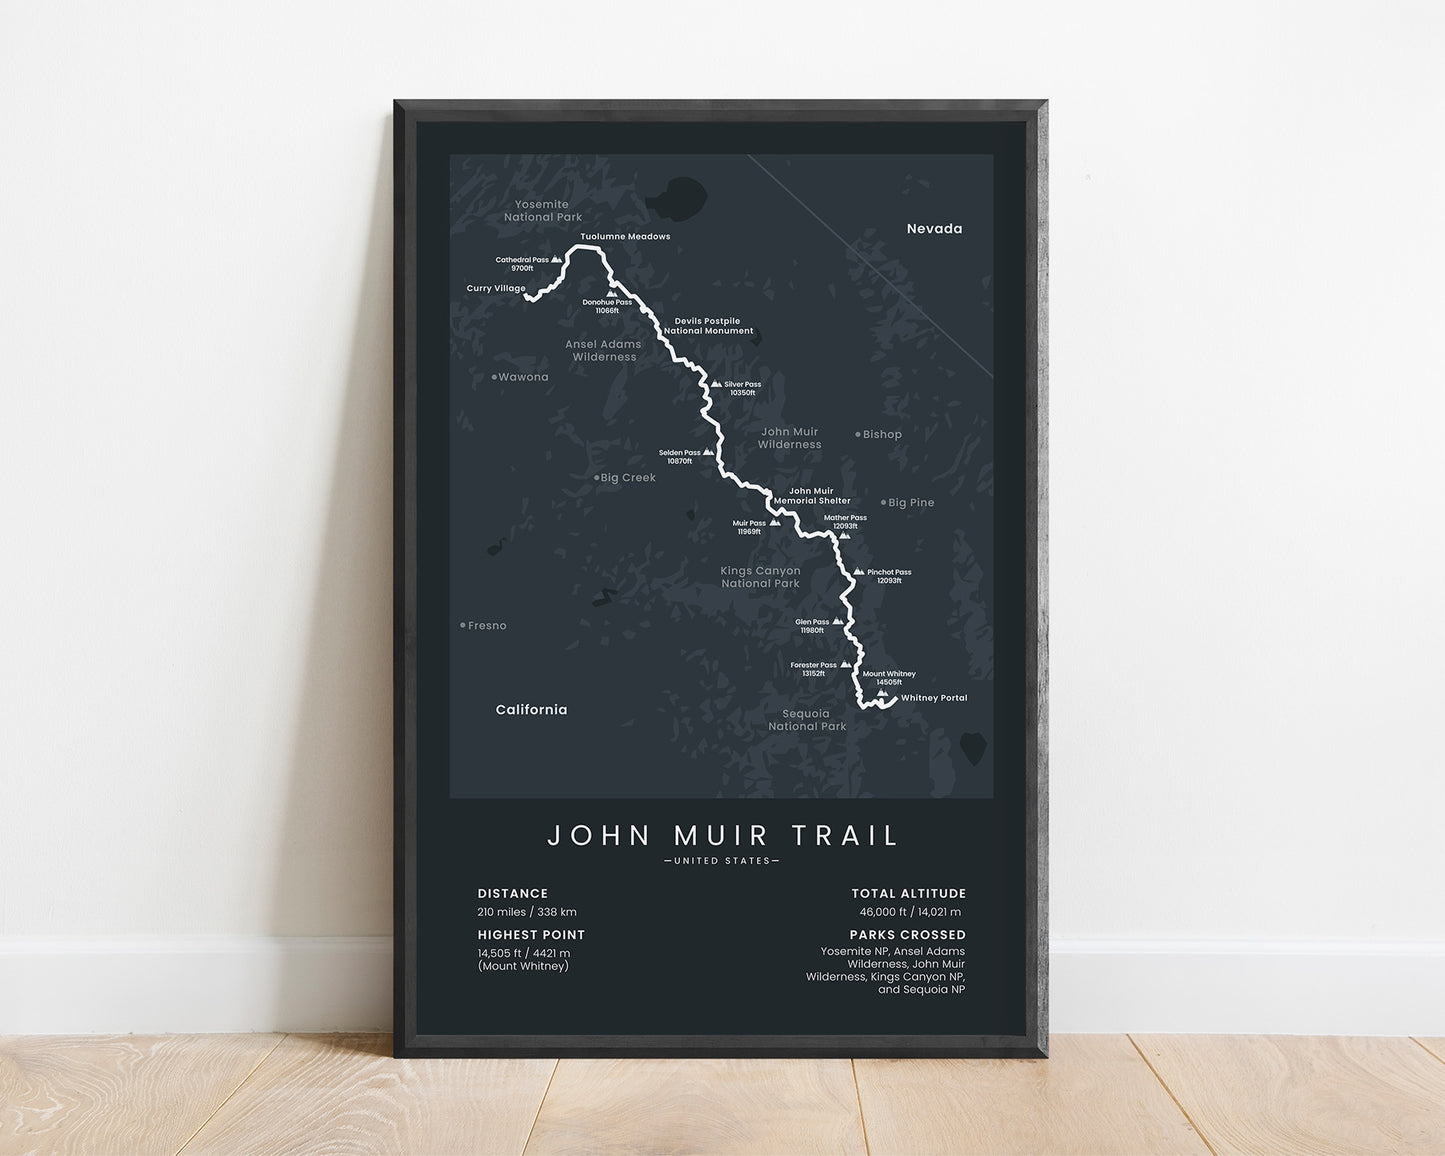 John Muir hiking trail (Crossing Yosemite, Sequoia National Park, King's Canyon, and Sierra Nevada mountain range) poster with black background